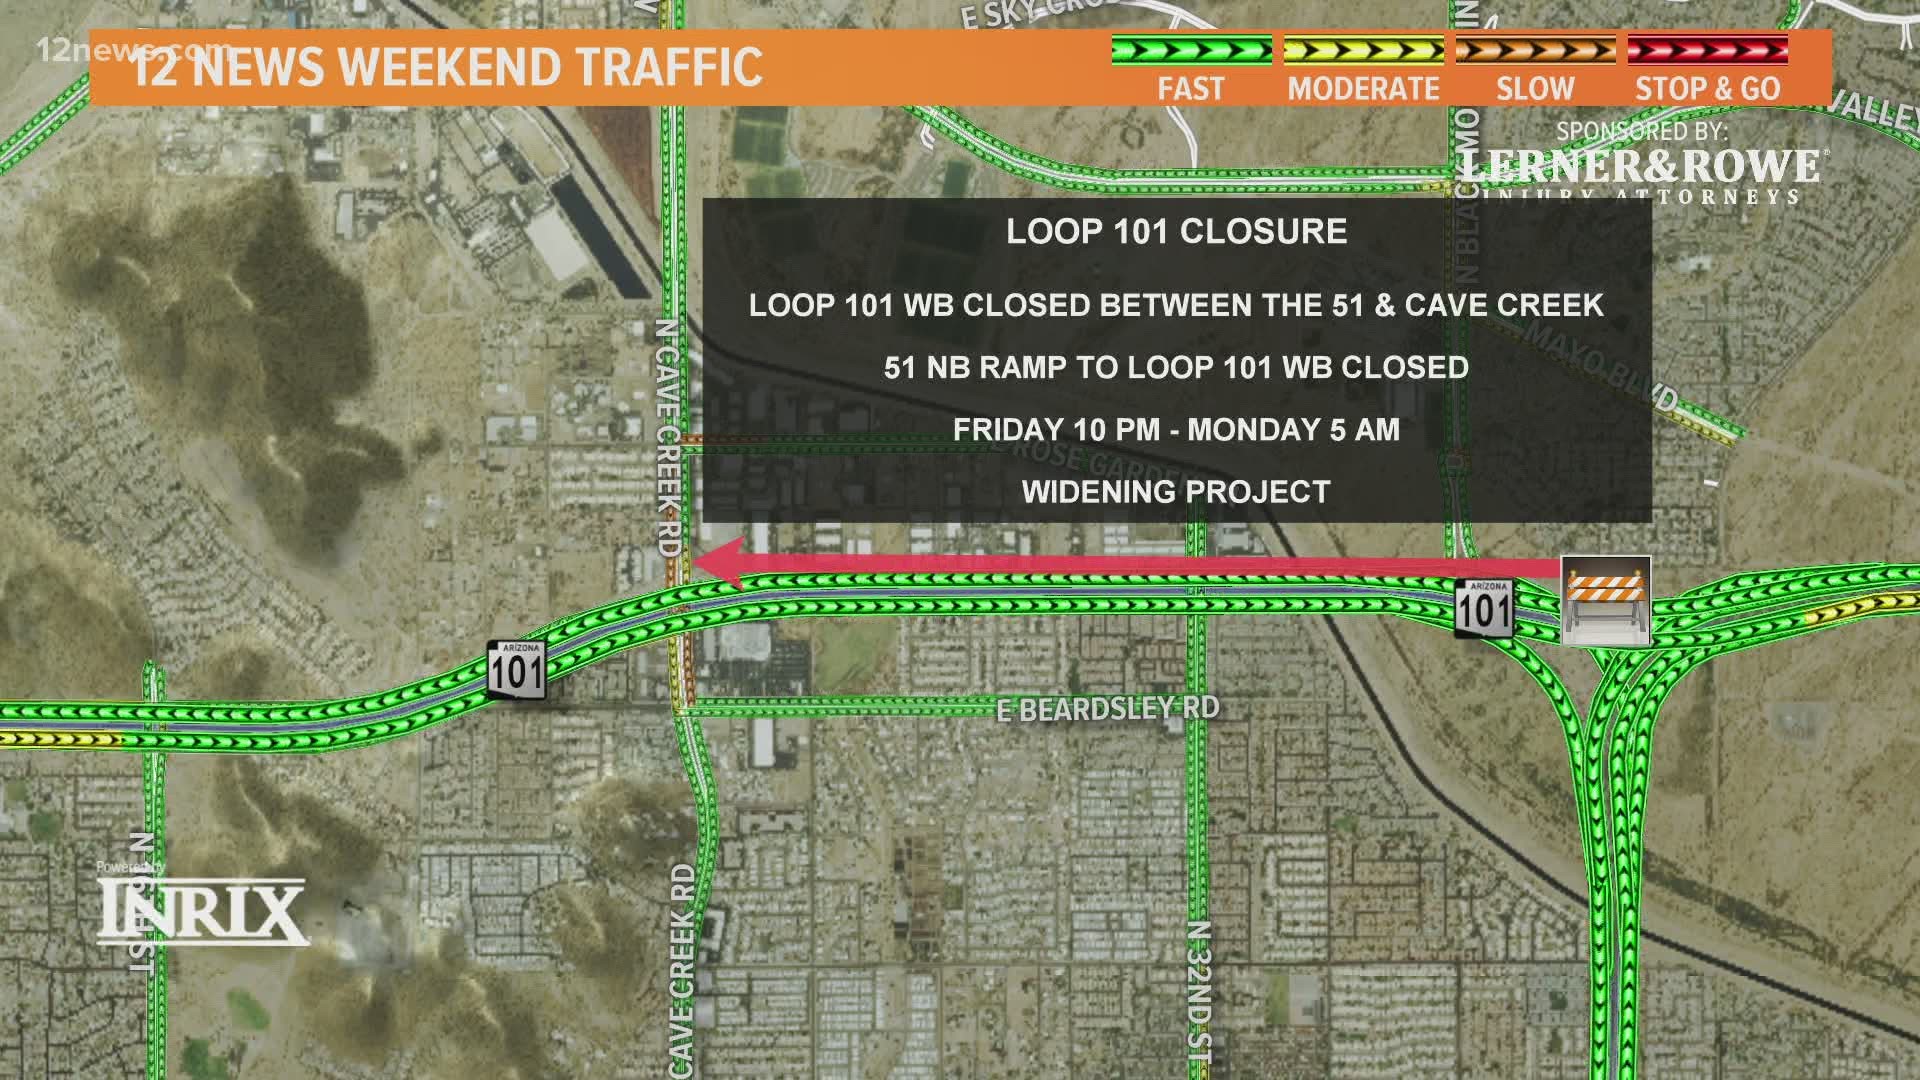 Let's take a look at the closures and detours on Valley roads this weekend. Vanessa Ramirez has the details.